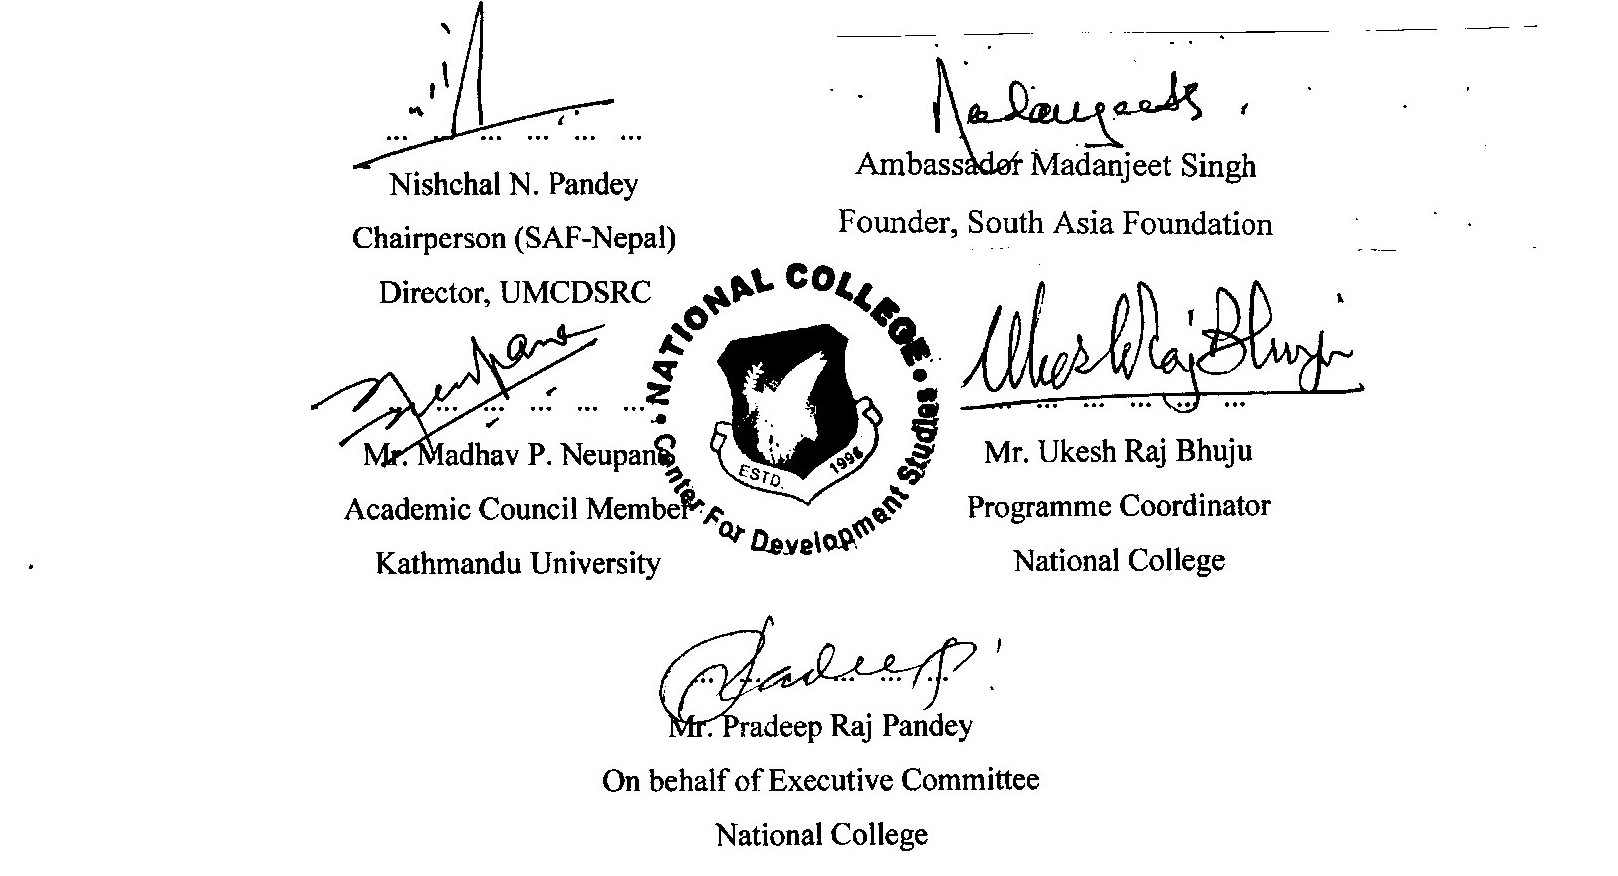 Signed MoU by UMCDSRC - South Asia Foundation